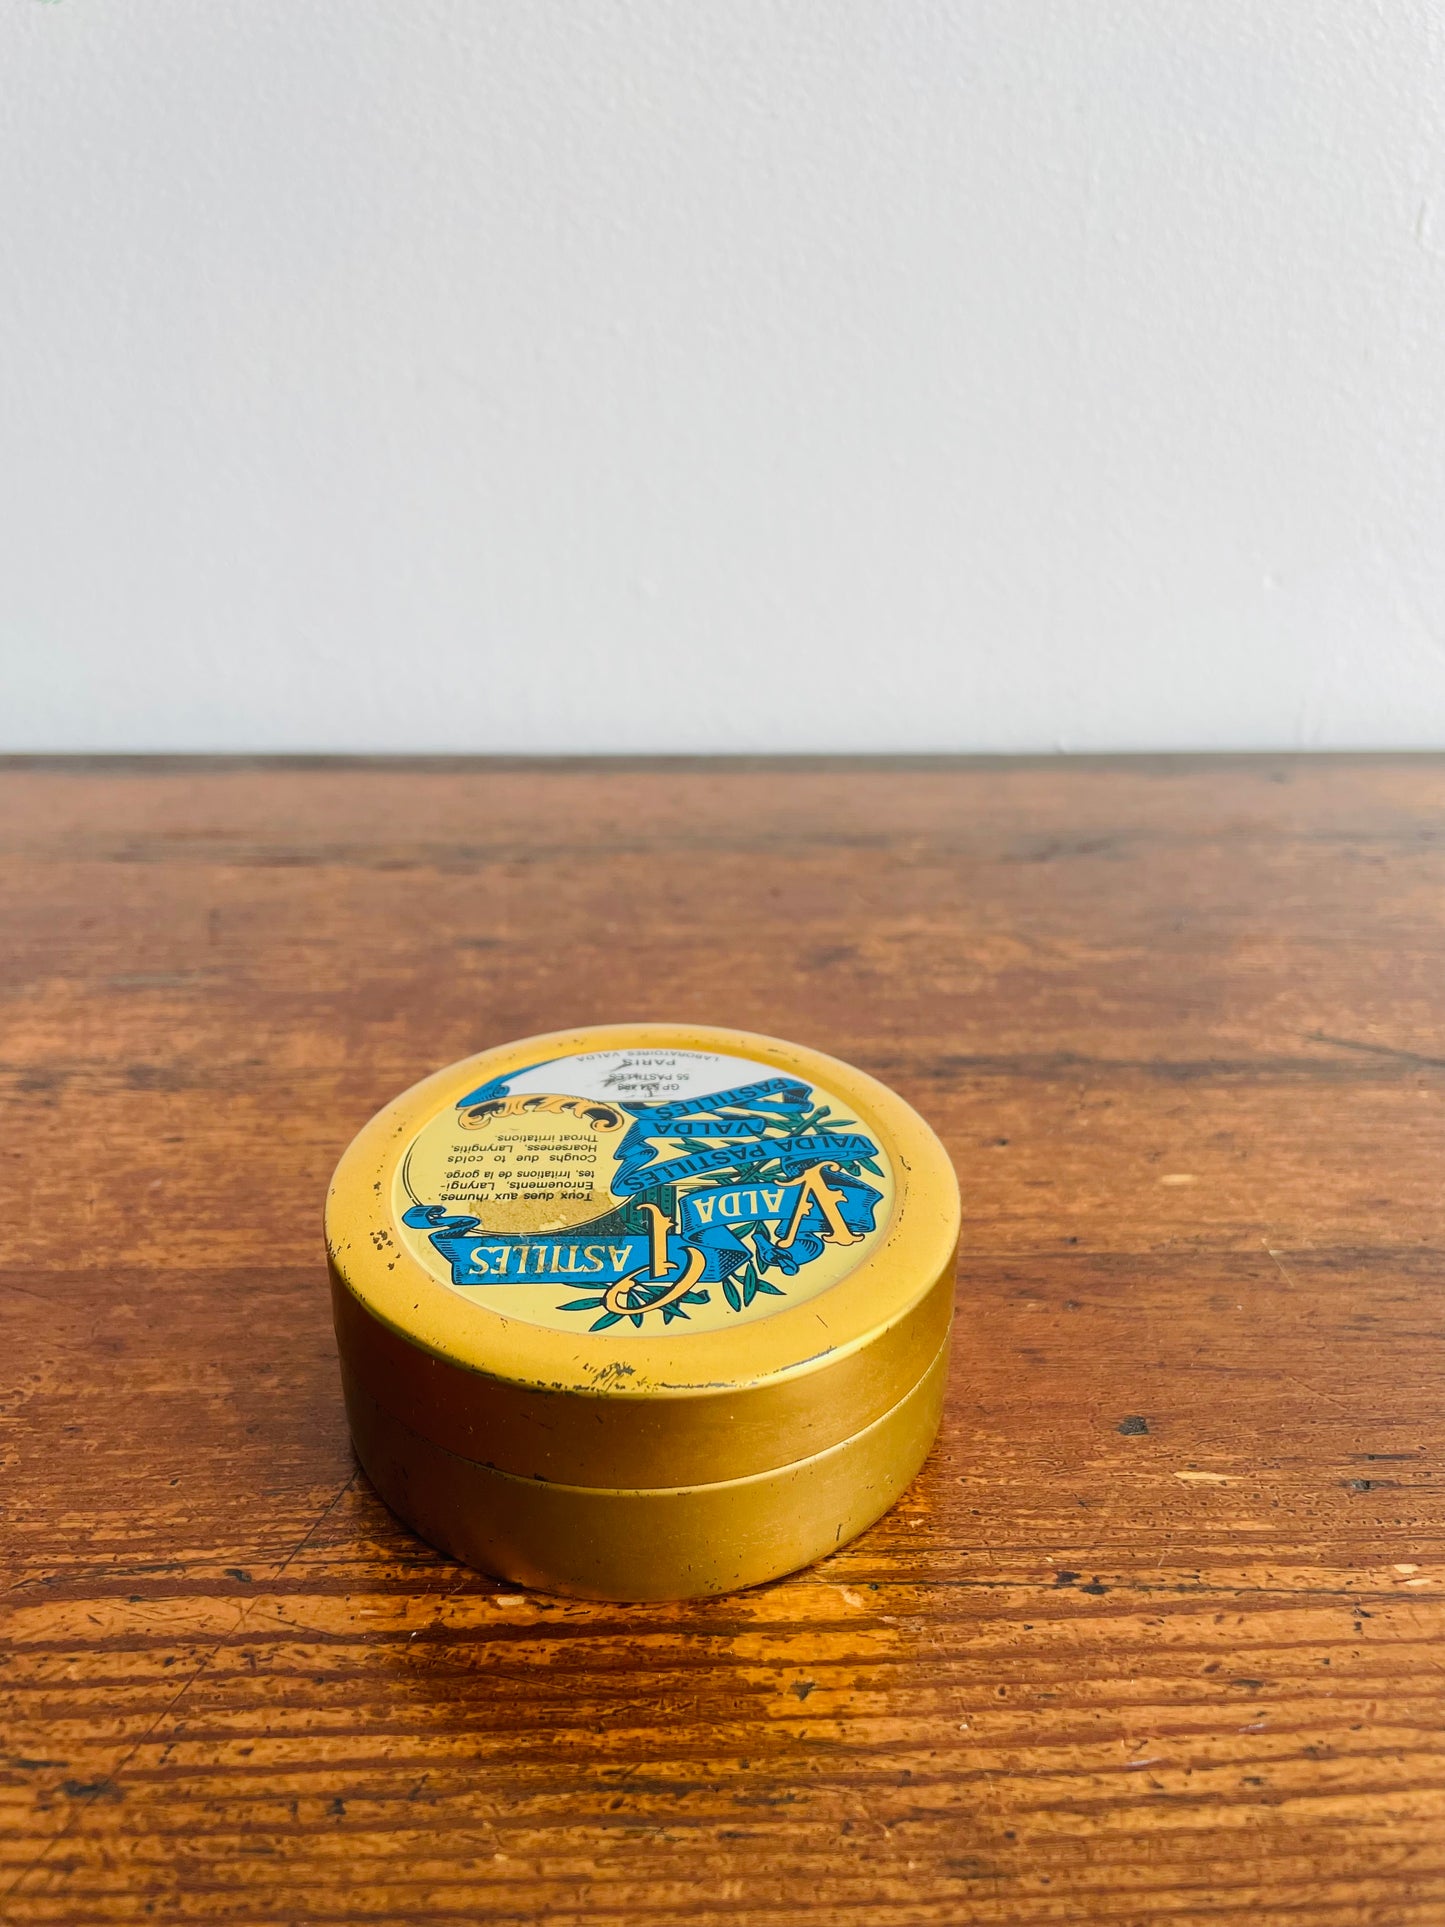 Valda Pastilles French Candy Container Tin with Lid - Great for Storing Small Items!